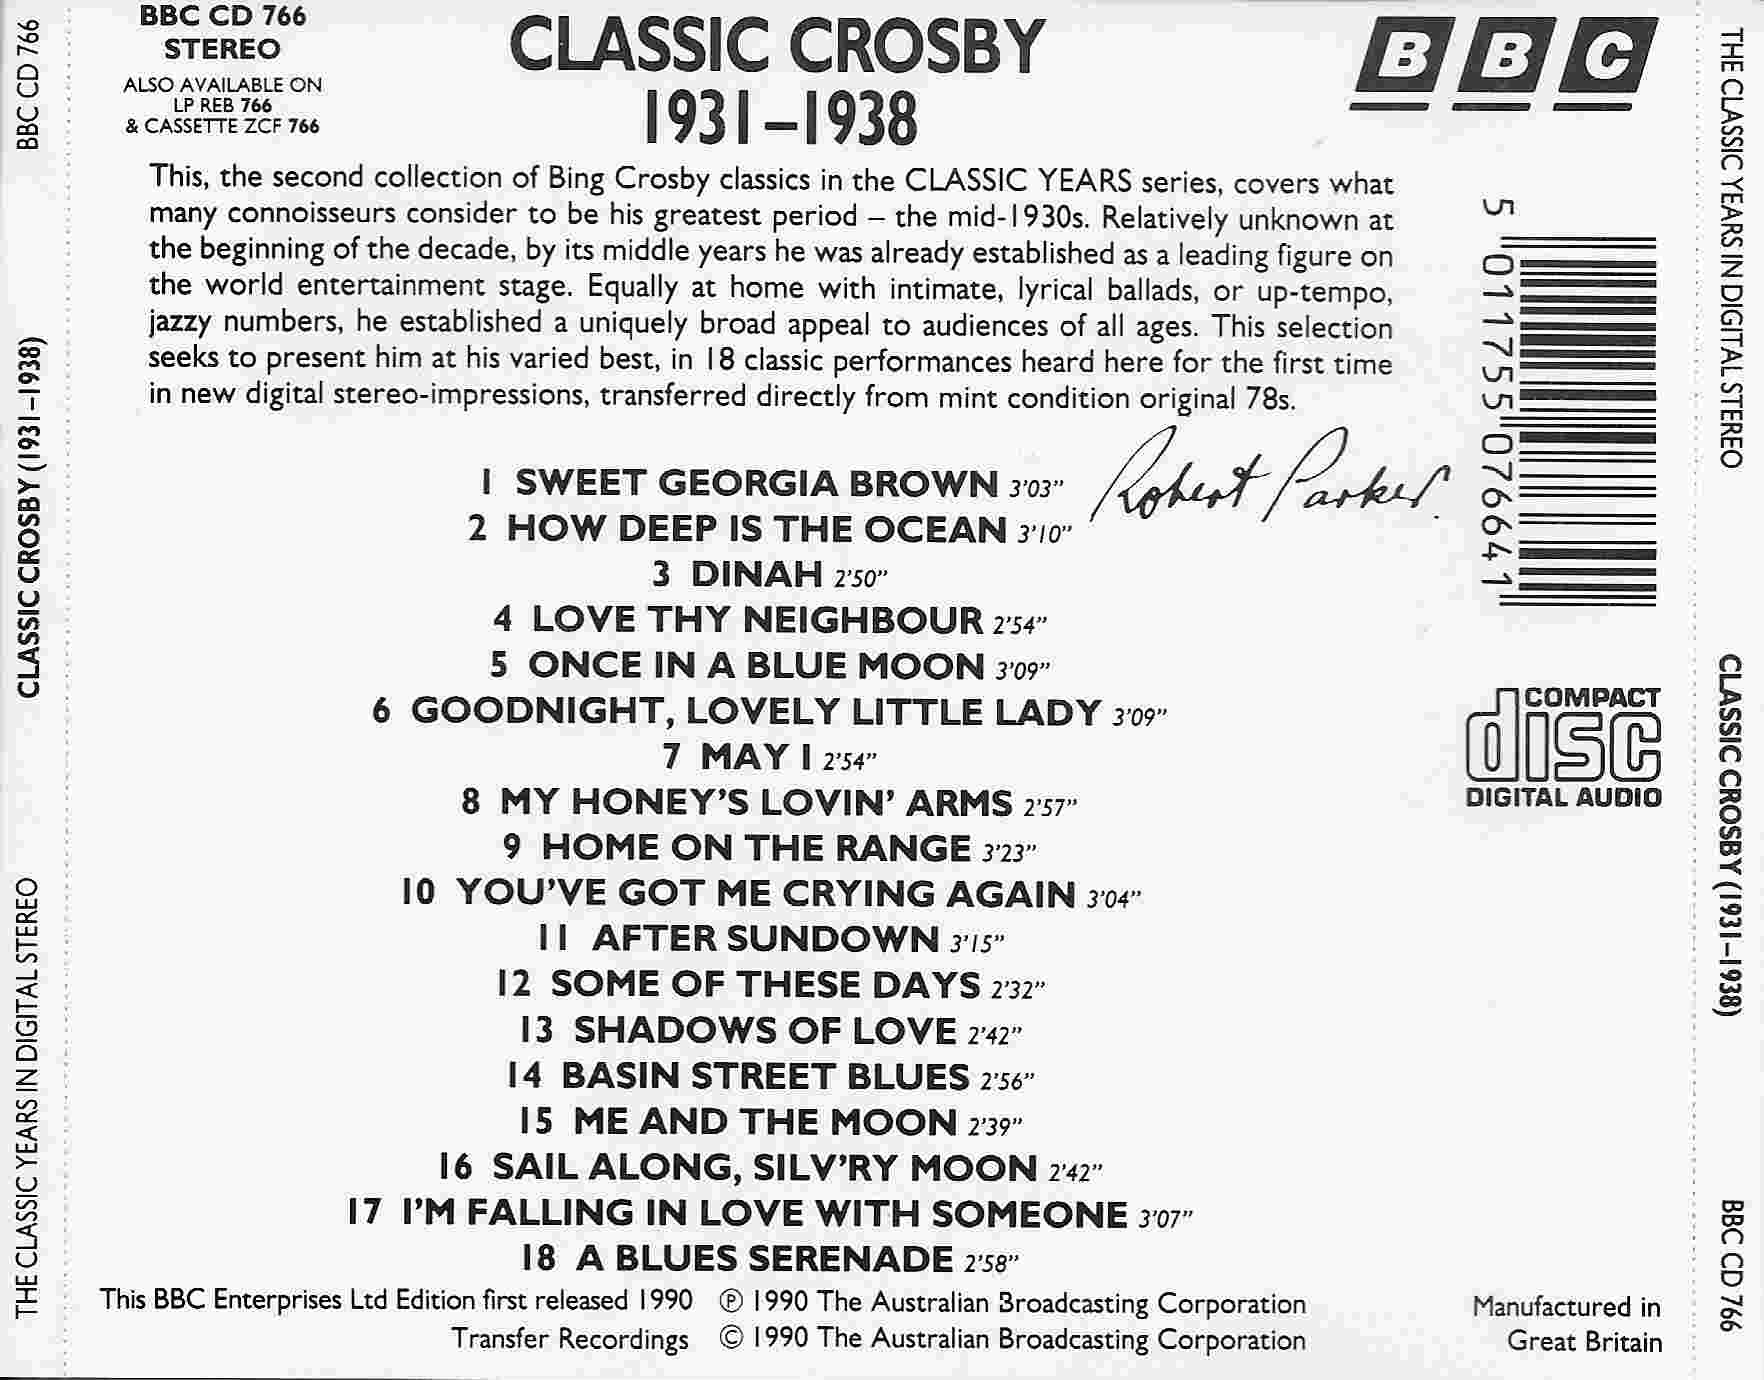 Picture of BBCCD766 Classic years - Classic Crosby 1931 - 1938 by artist Bing Crosby  from the BBC records and Tapes library